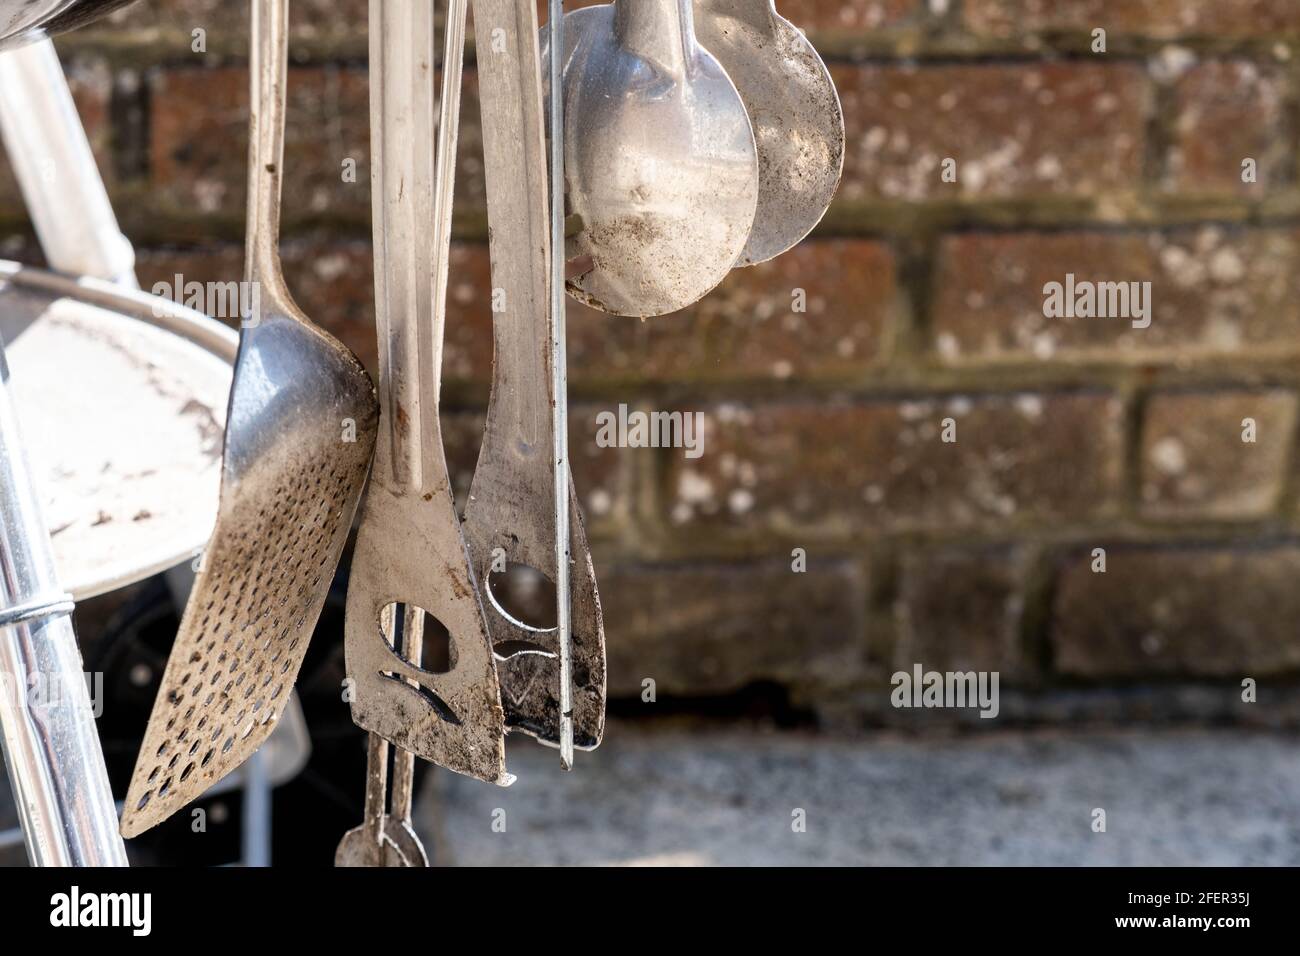 Epsom Surrey, London England UK, April 23 2021, A Collection Of Stainless Steel BBQ Cooking Utensils With No People On A Sunny Day Stock Photo